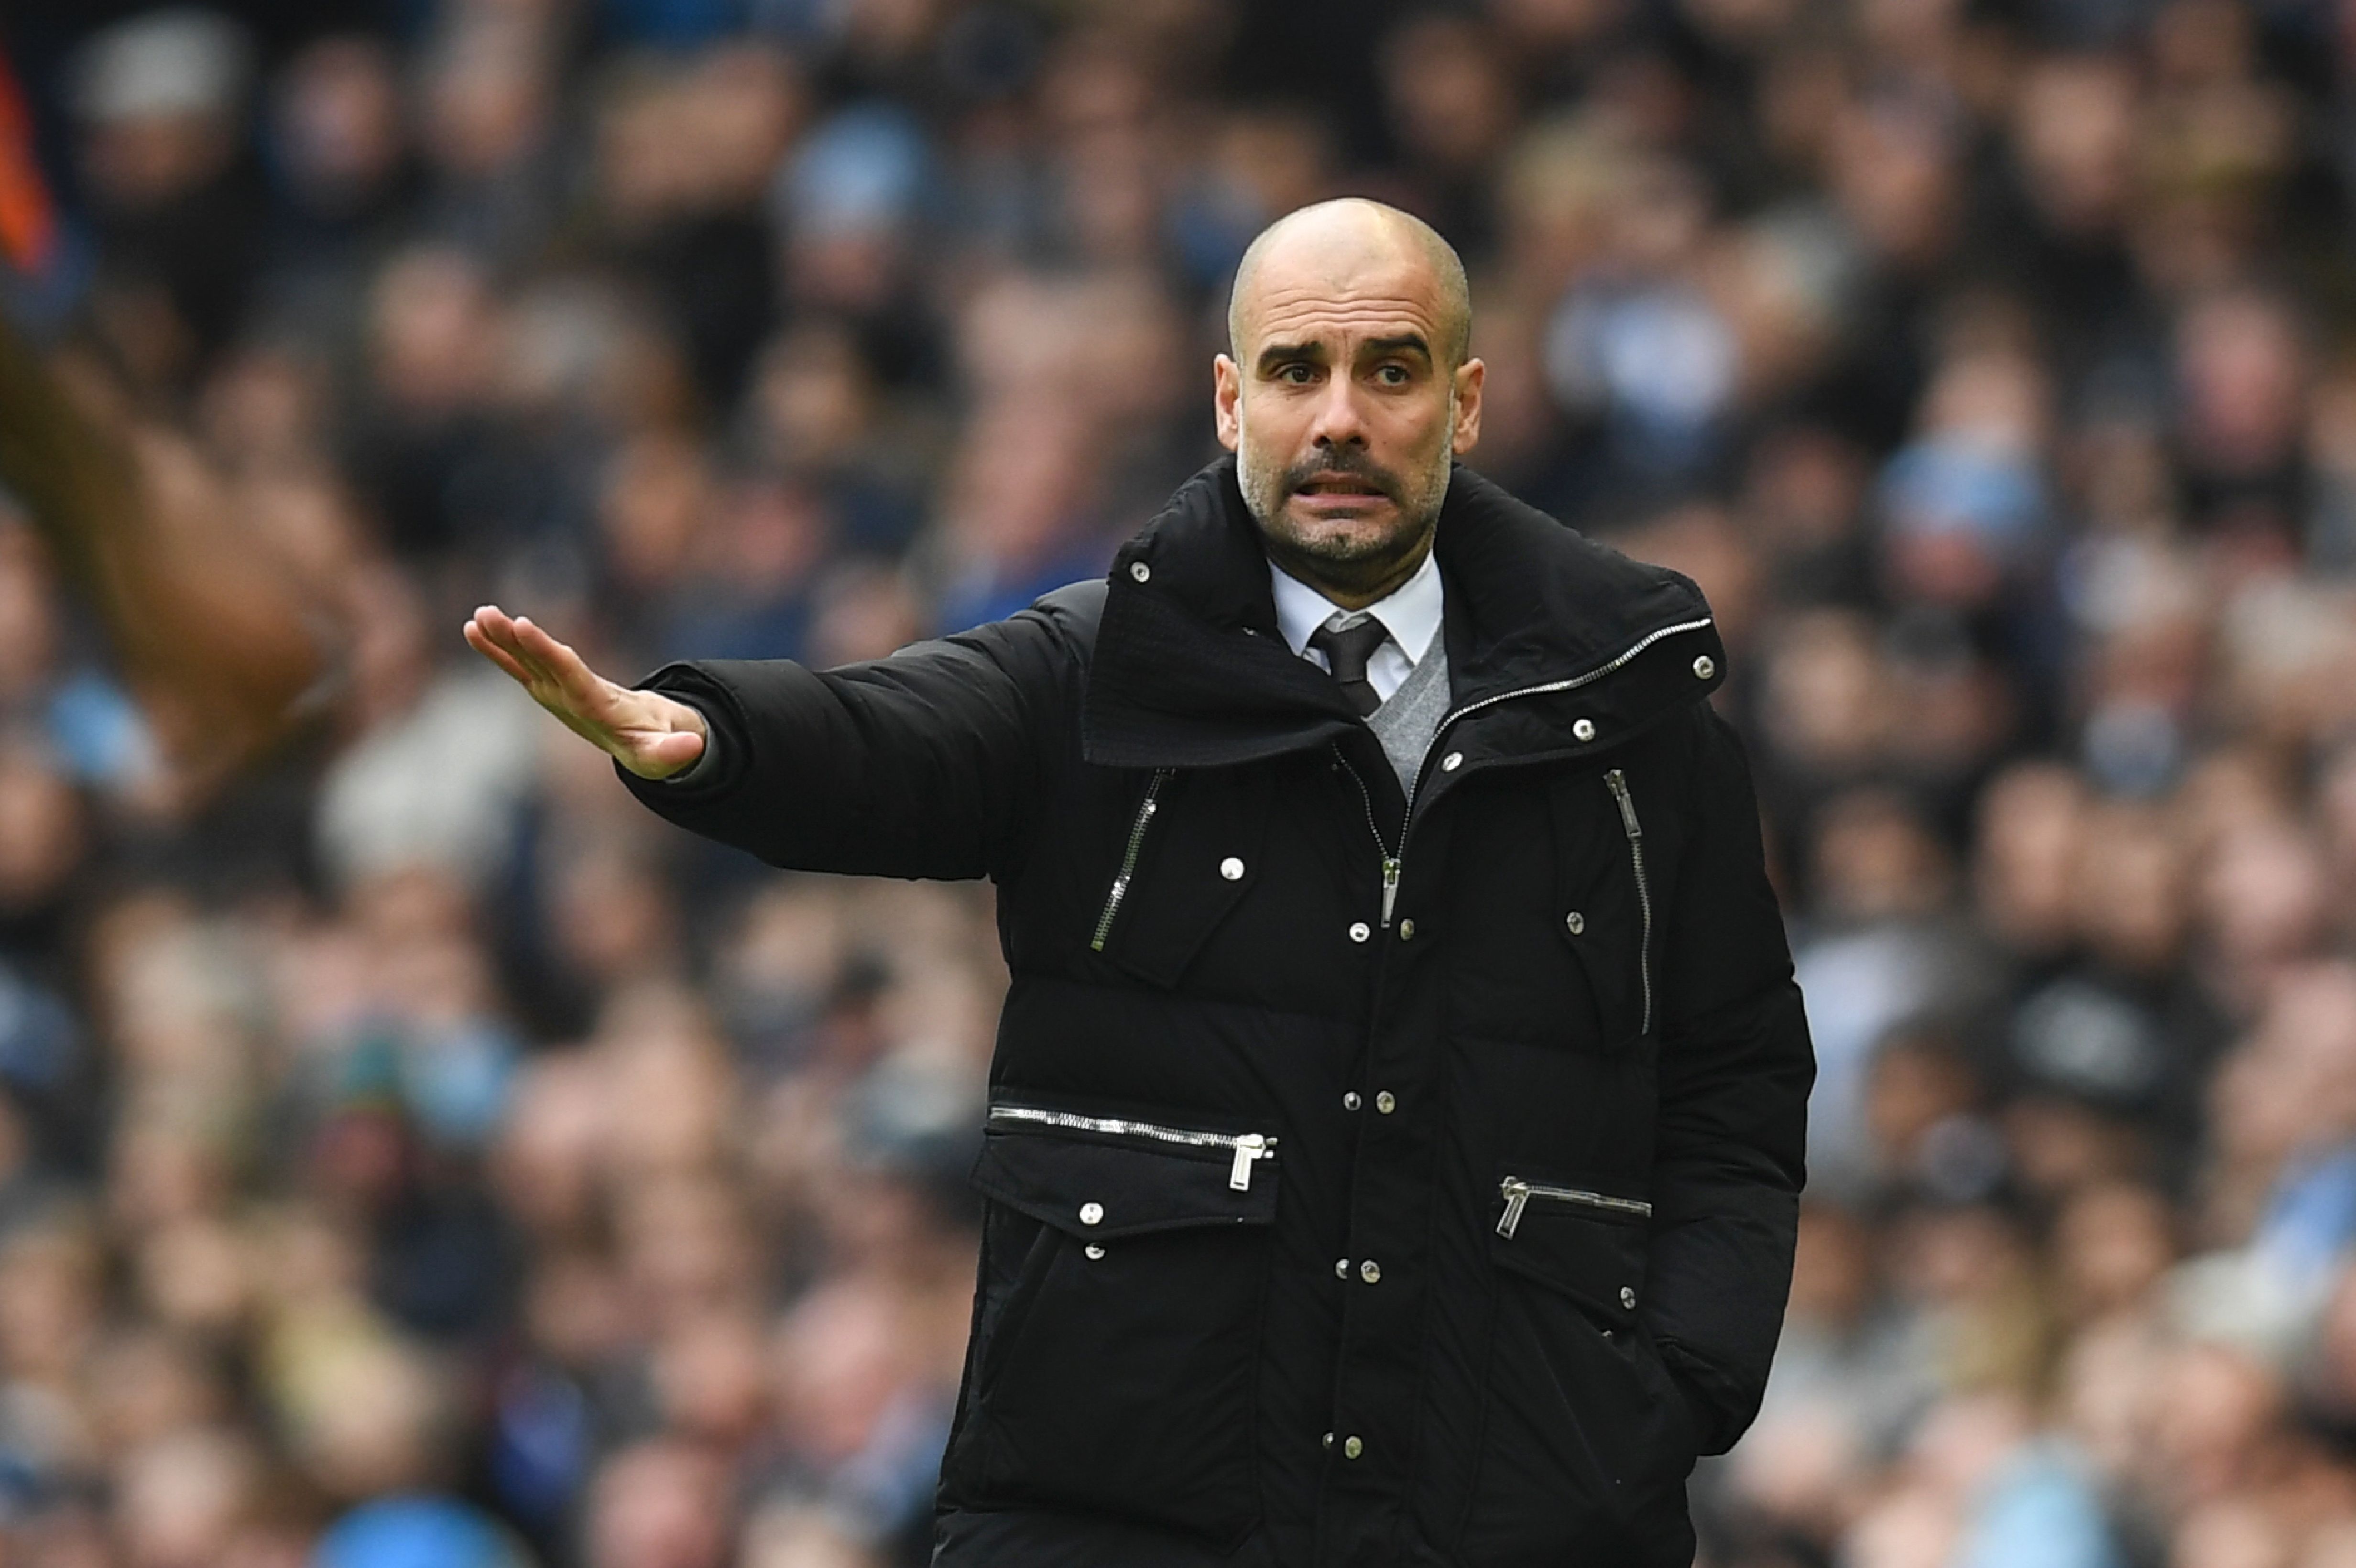 Manchester City's Spanish manager Pep Guardiola gestures on the touchline during the English Premier League football match between Manchester City and Swansea City at the Etihad Stadium in Manchester, north west England, on February 5, 2017. / AFP / Paul ELLIS / RESTRICTED TO EDITORIAL USE. No use with unauthorized audio, video, data, fixture lists, club/league logos or 'live' services. Online in-match use limited to 75 images, no video emulation. No use in betting, games or single club/league/player publications.  /         (Photo credit should read PAUL ELLIS/AFP/Getty Images)